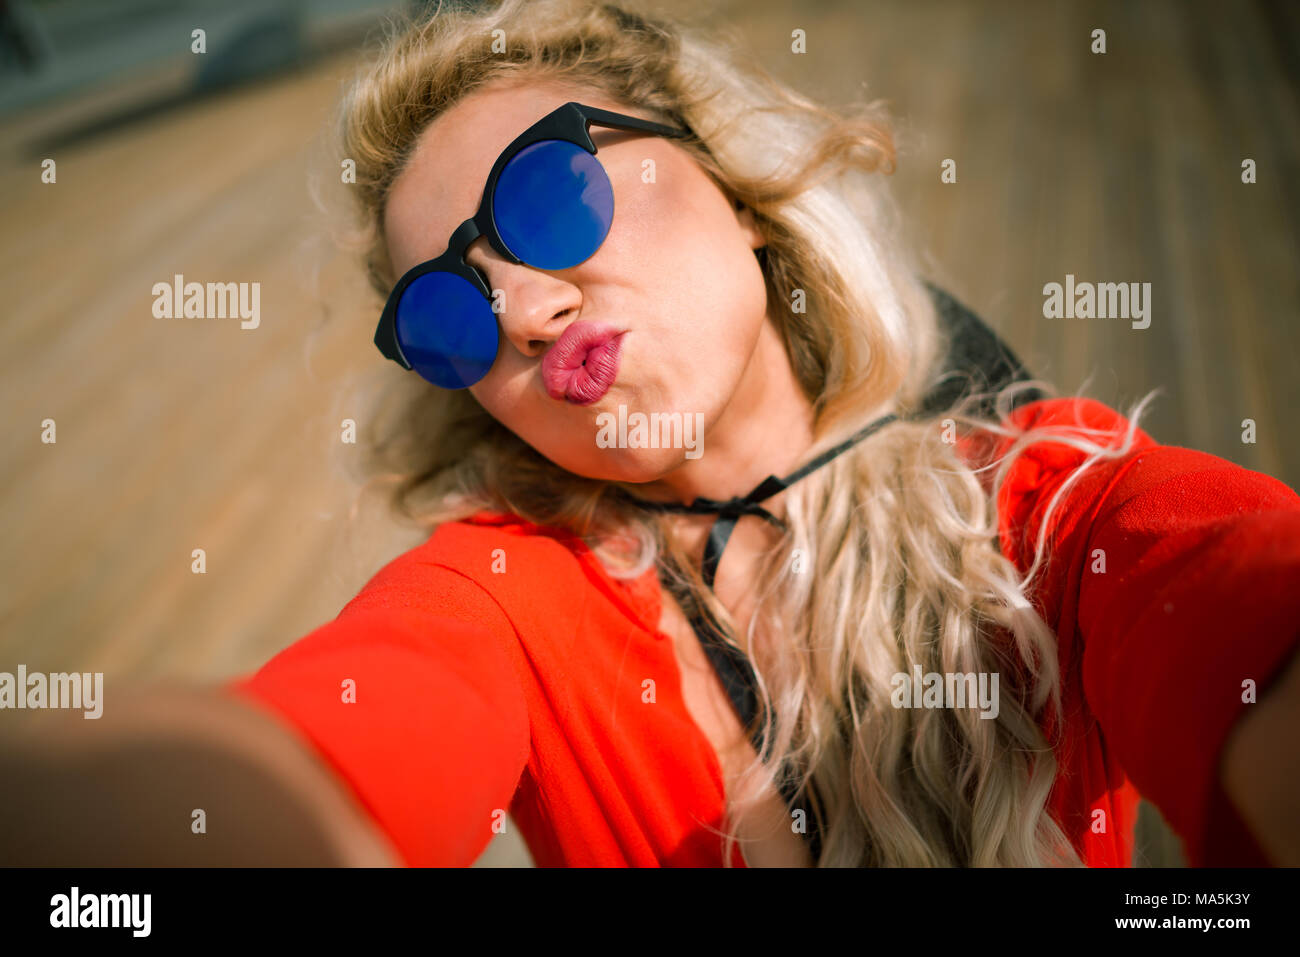 Close-up view of young beautiful woman in bright red dress shows a kiss at city waterfront. Elegant blonde girl with pretty face on wooden promenade Stock Photo